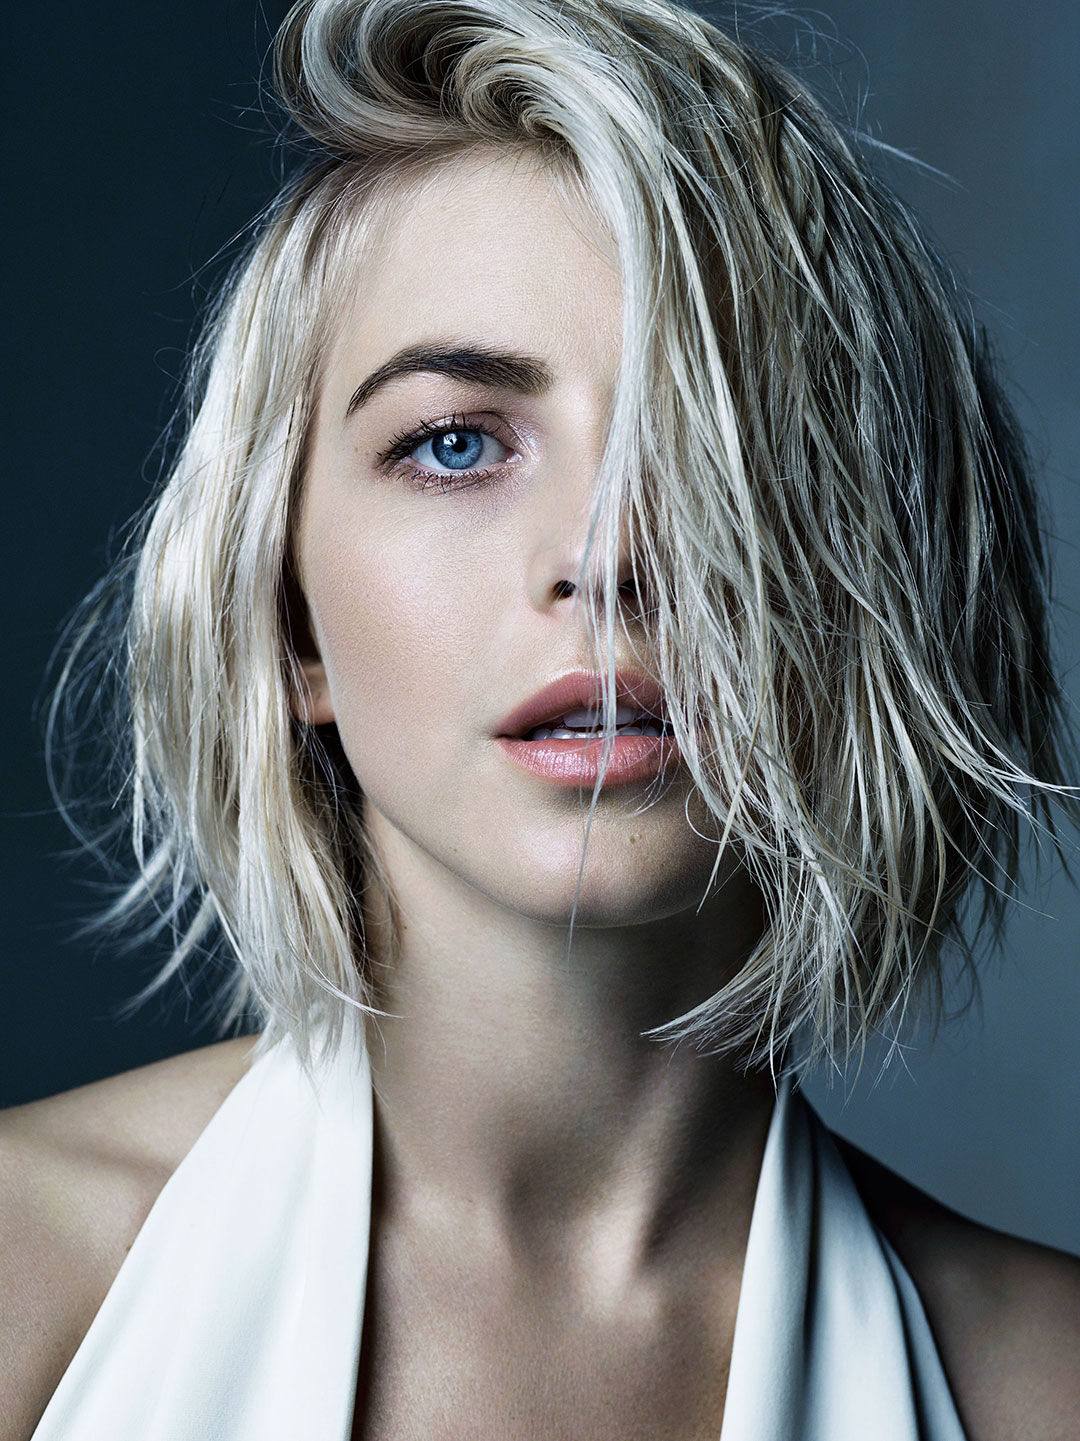 Julianne Hough Yahoo Style Portrait Photographed by Alisha Goldstein of Jane Smith Agency